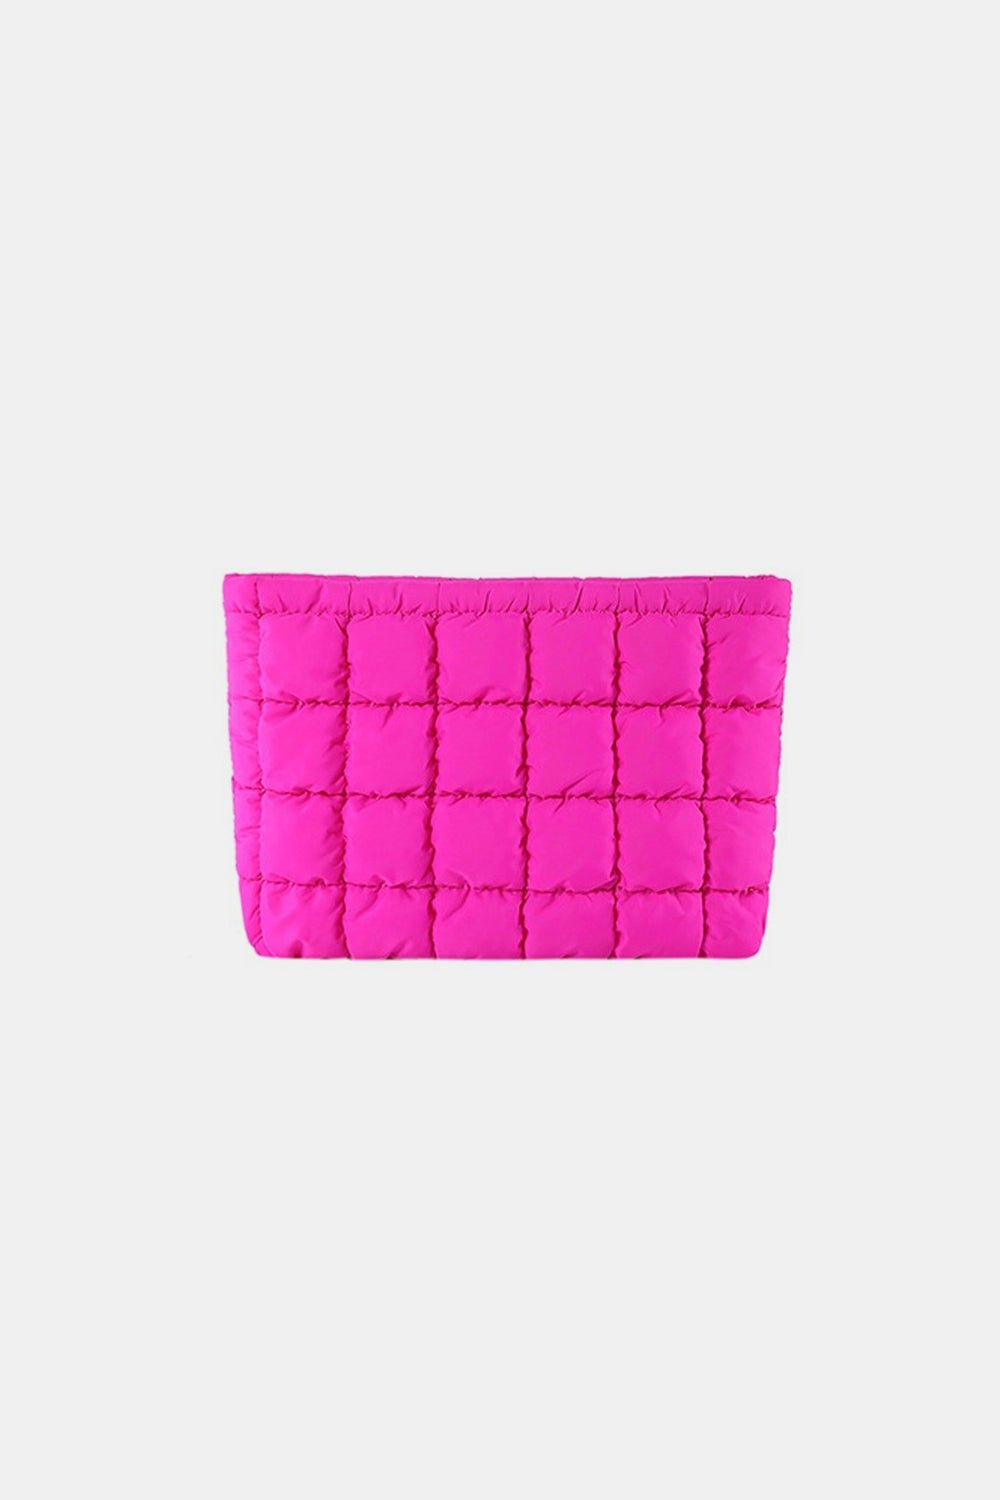 Zenana Quilted Puffy Pouch Clutch Bag - Happily Ever Atchison Shop Co.